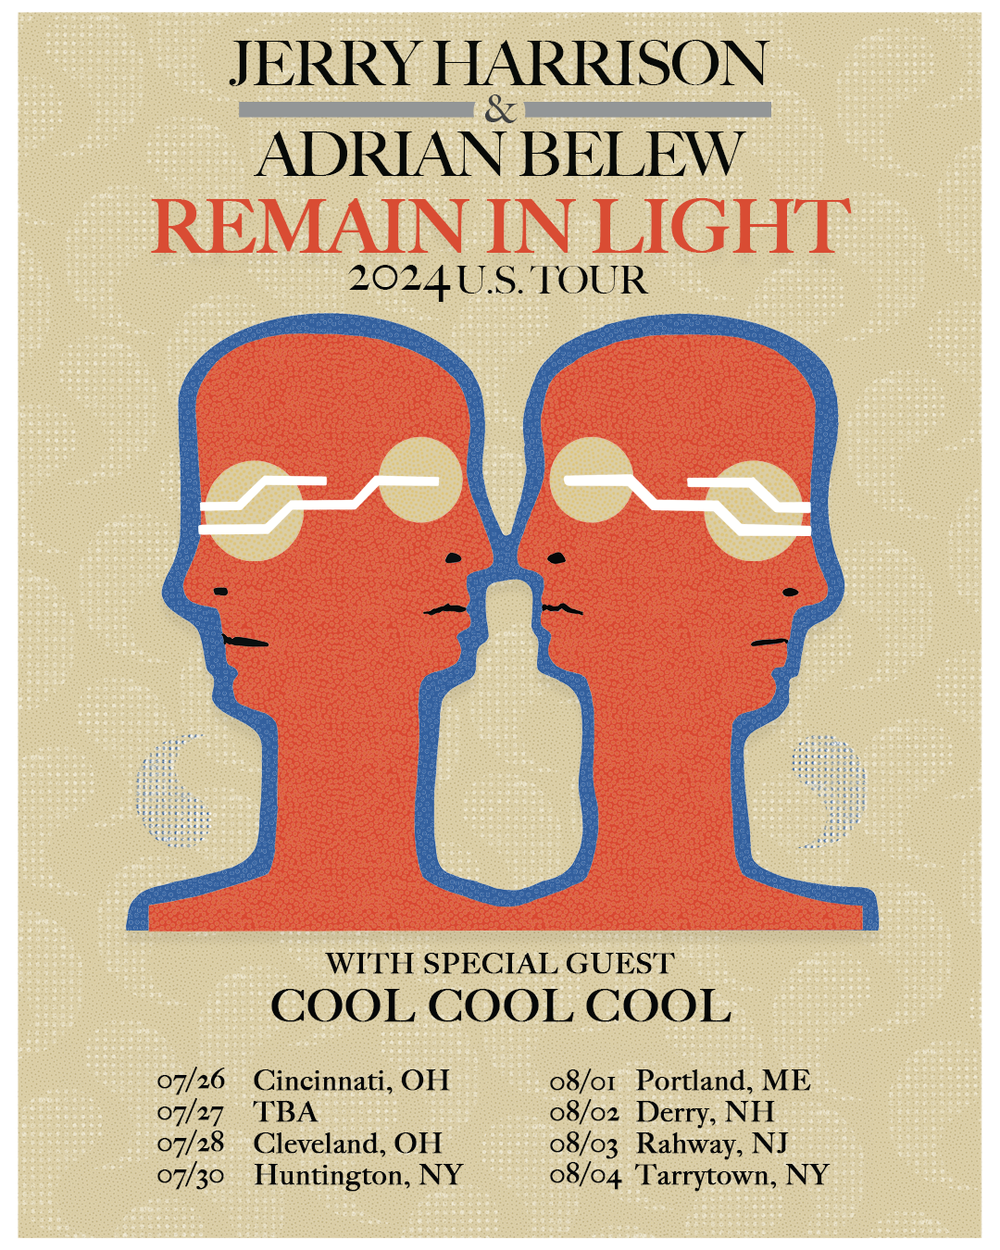 Cool Cool Cool - Remain In Light 2023 U.S. Tour